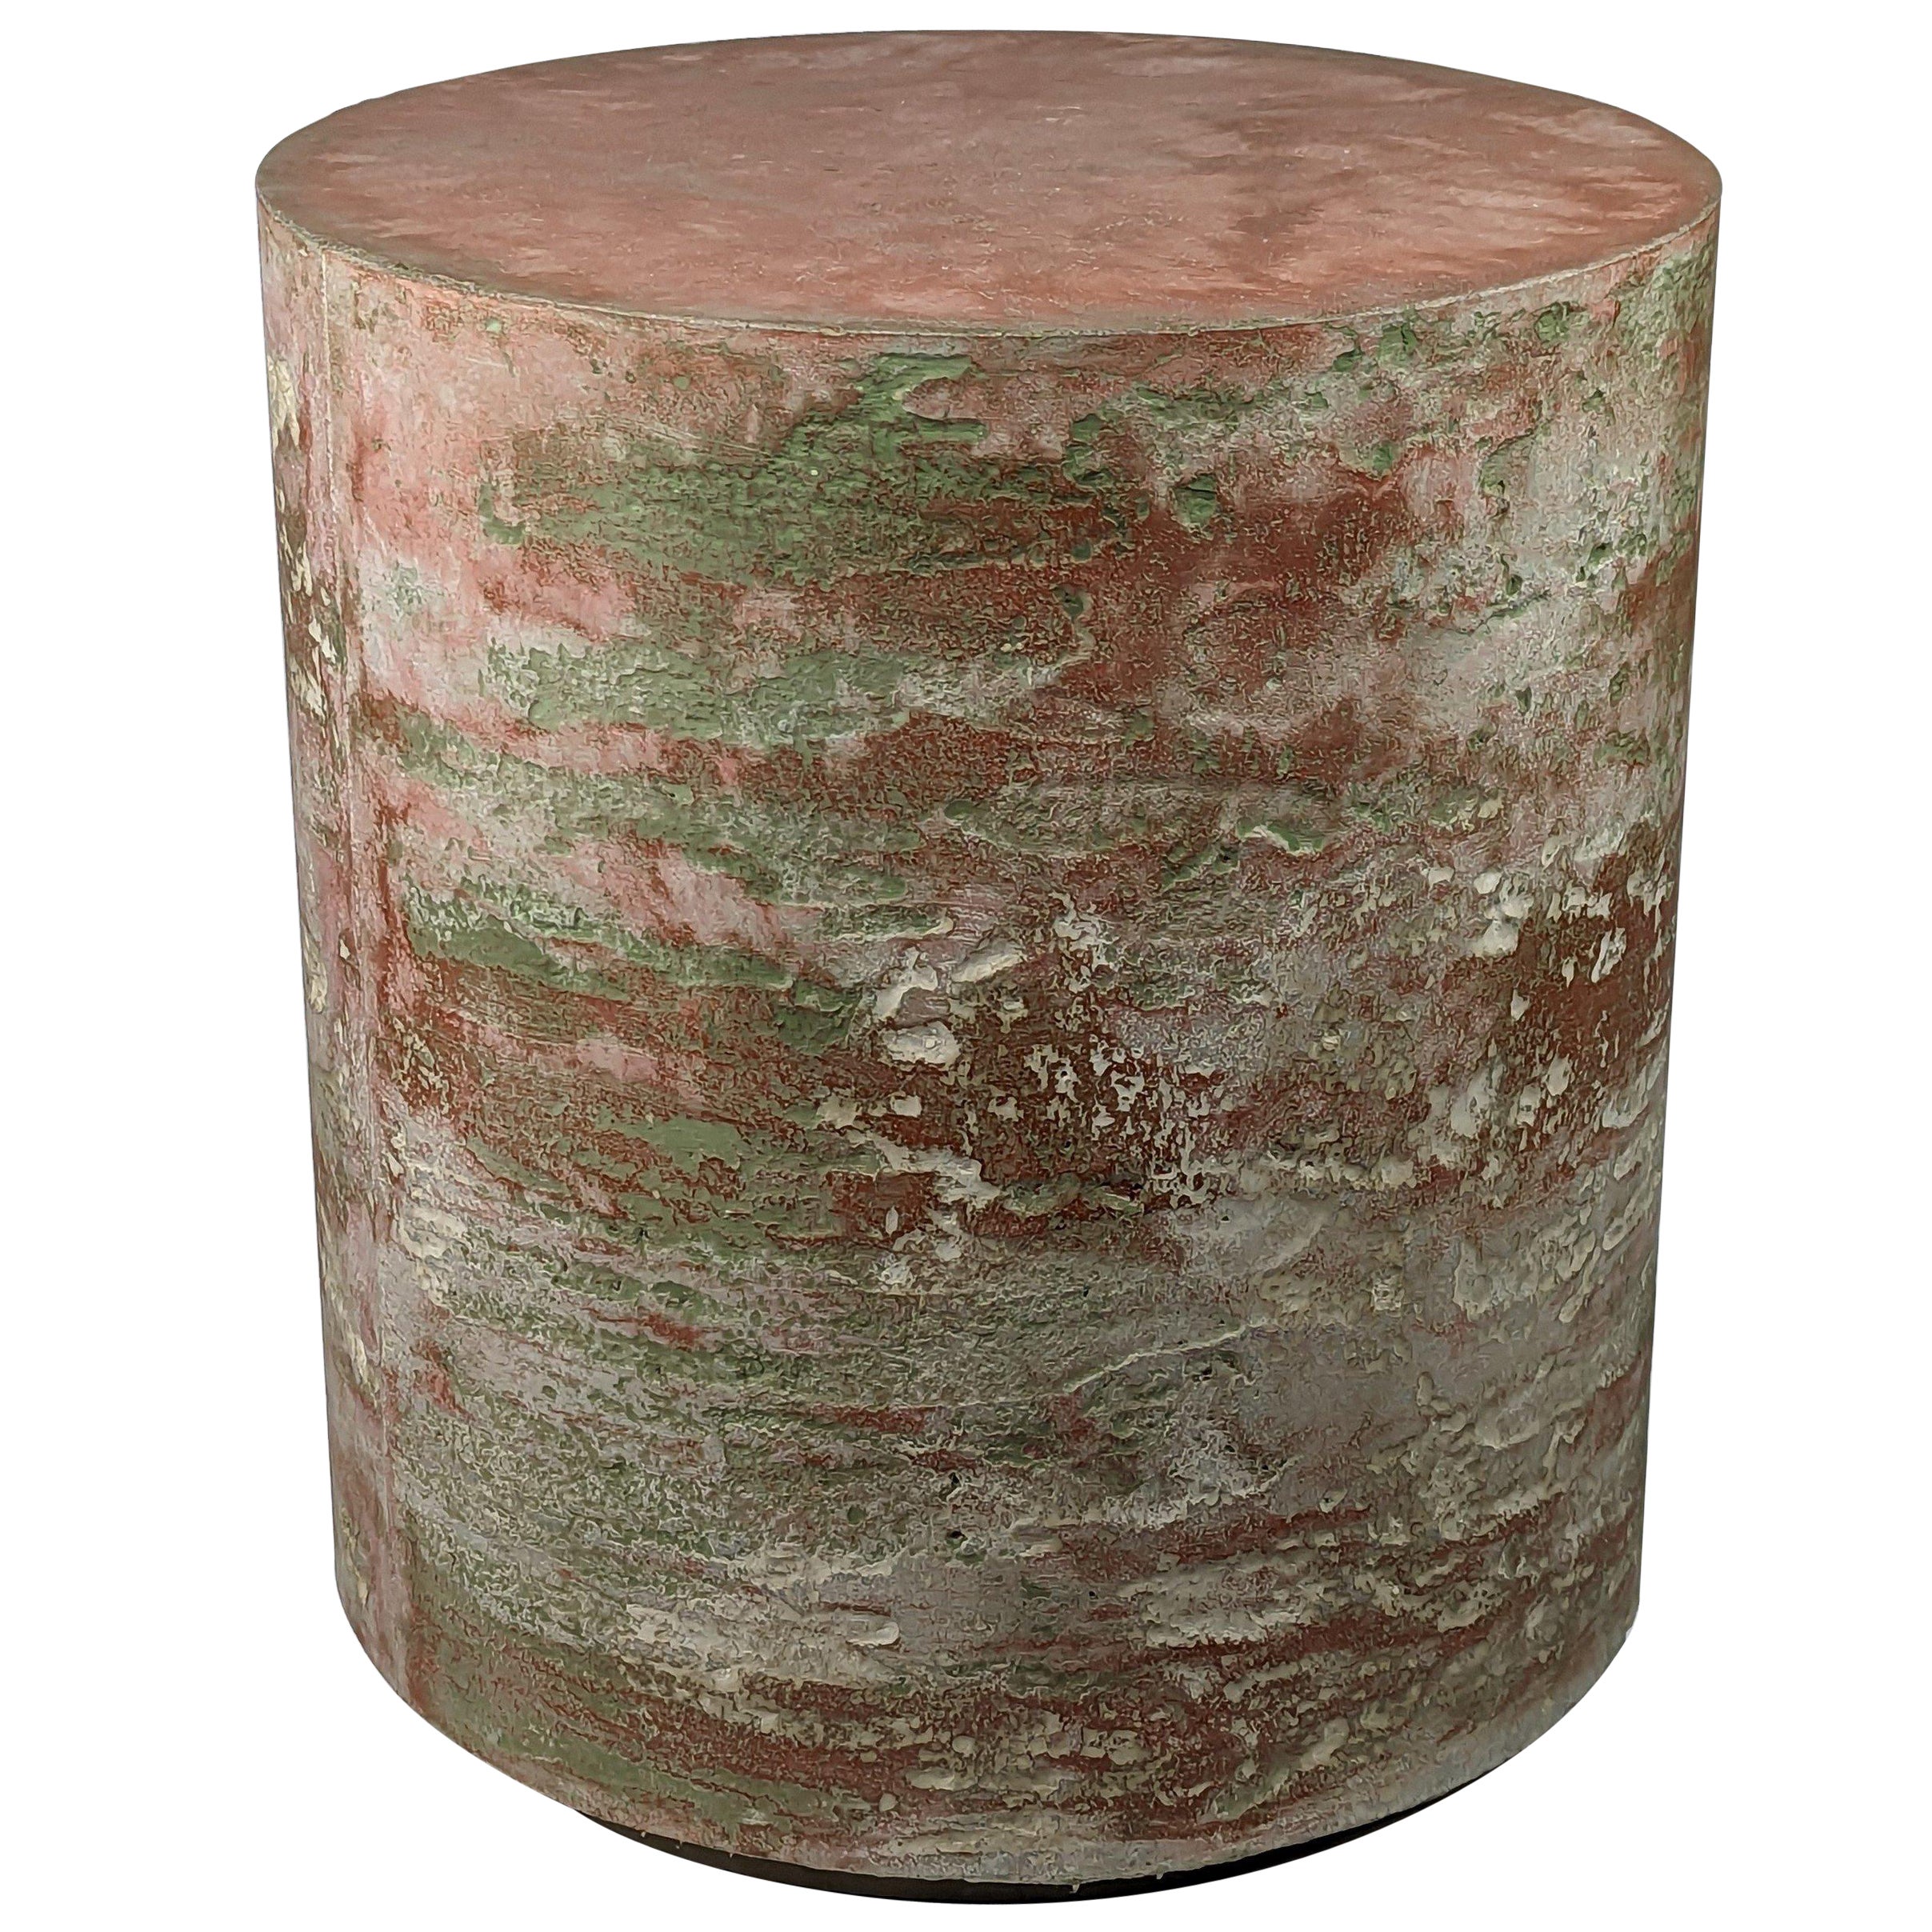 Geological Light MTO Red and Green Concrete Art Stool, 'Lichen on Mars' For Sale